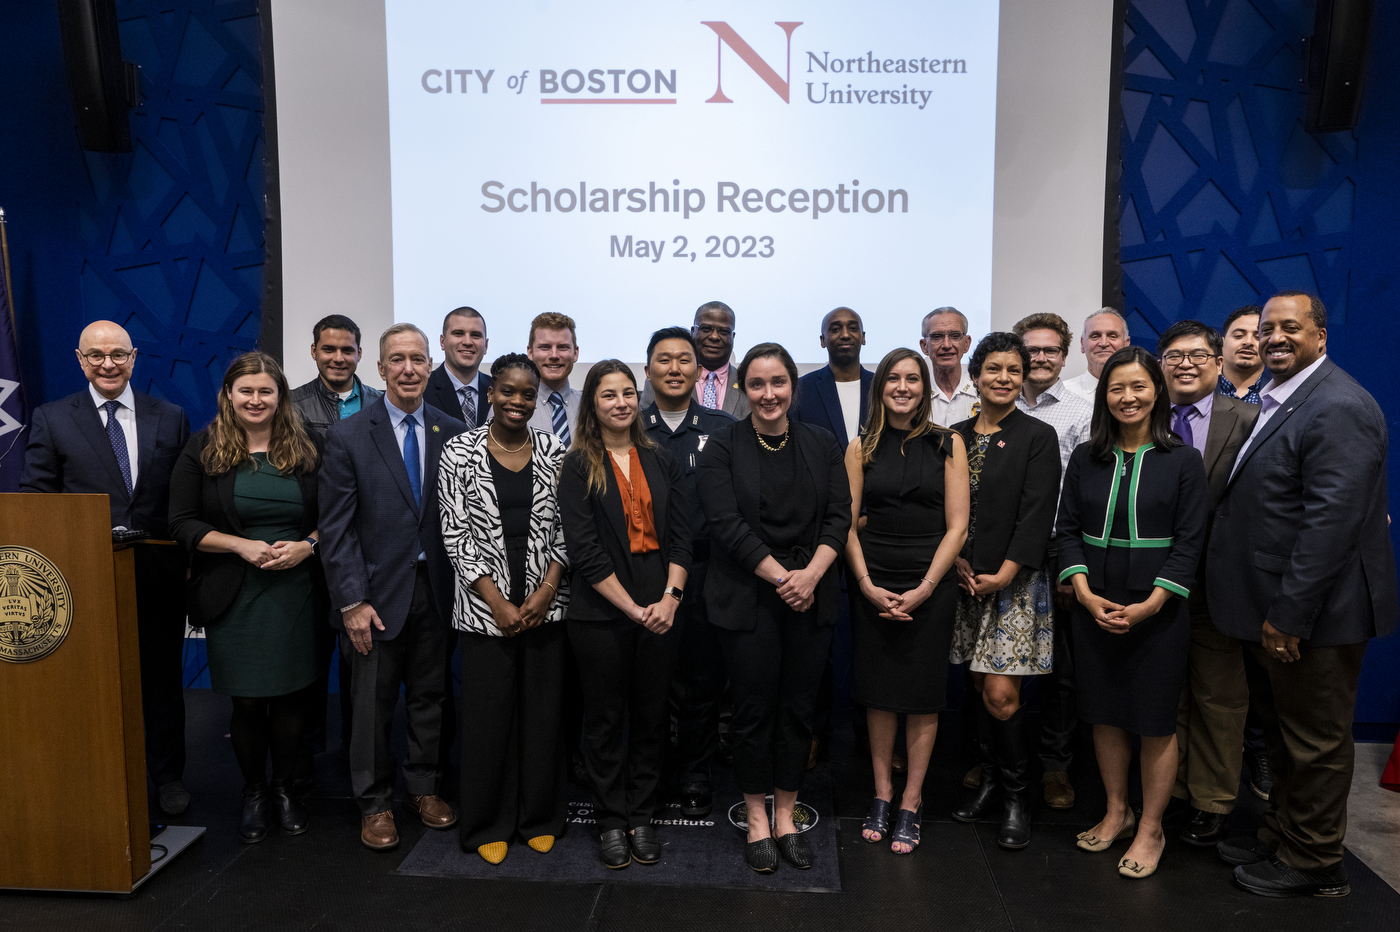 group of Boston city employees and Northeastern leadership posing for a photo